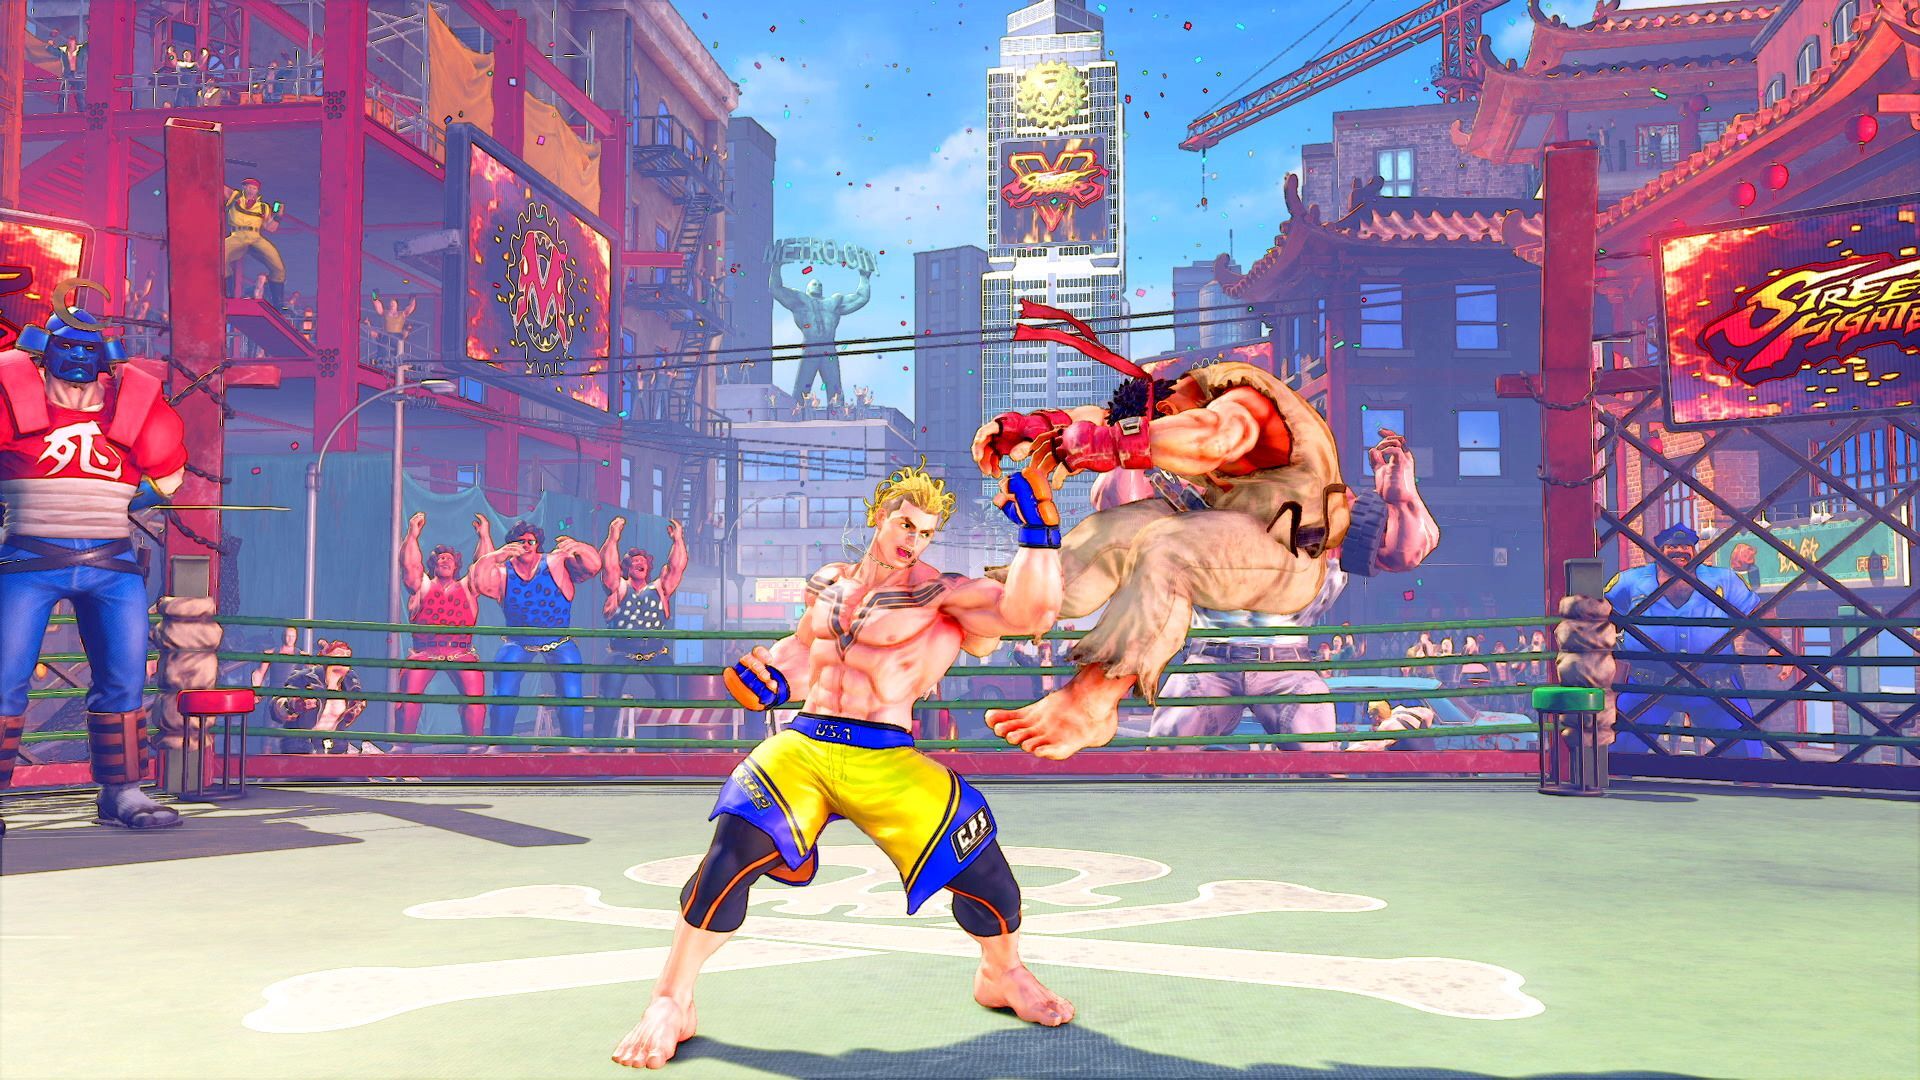 Capcom announces Street Fighter 6 Officially with First Teaser Trailer